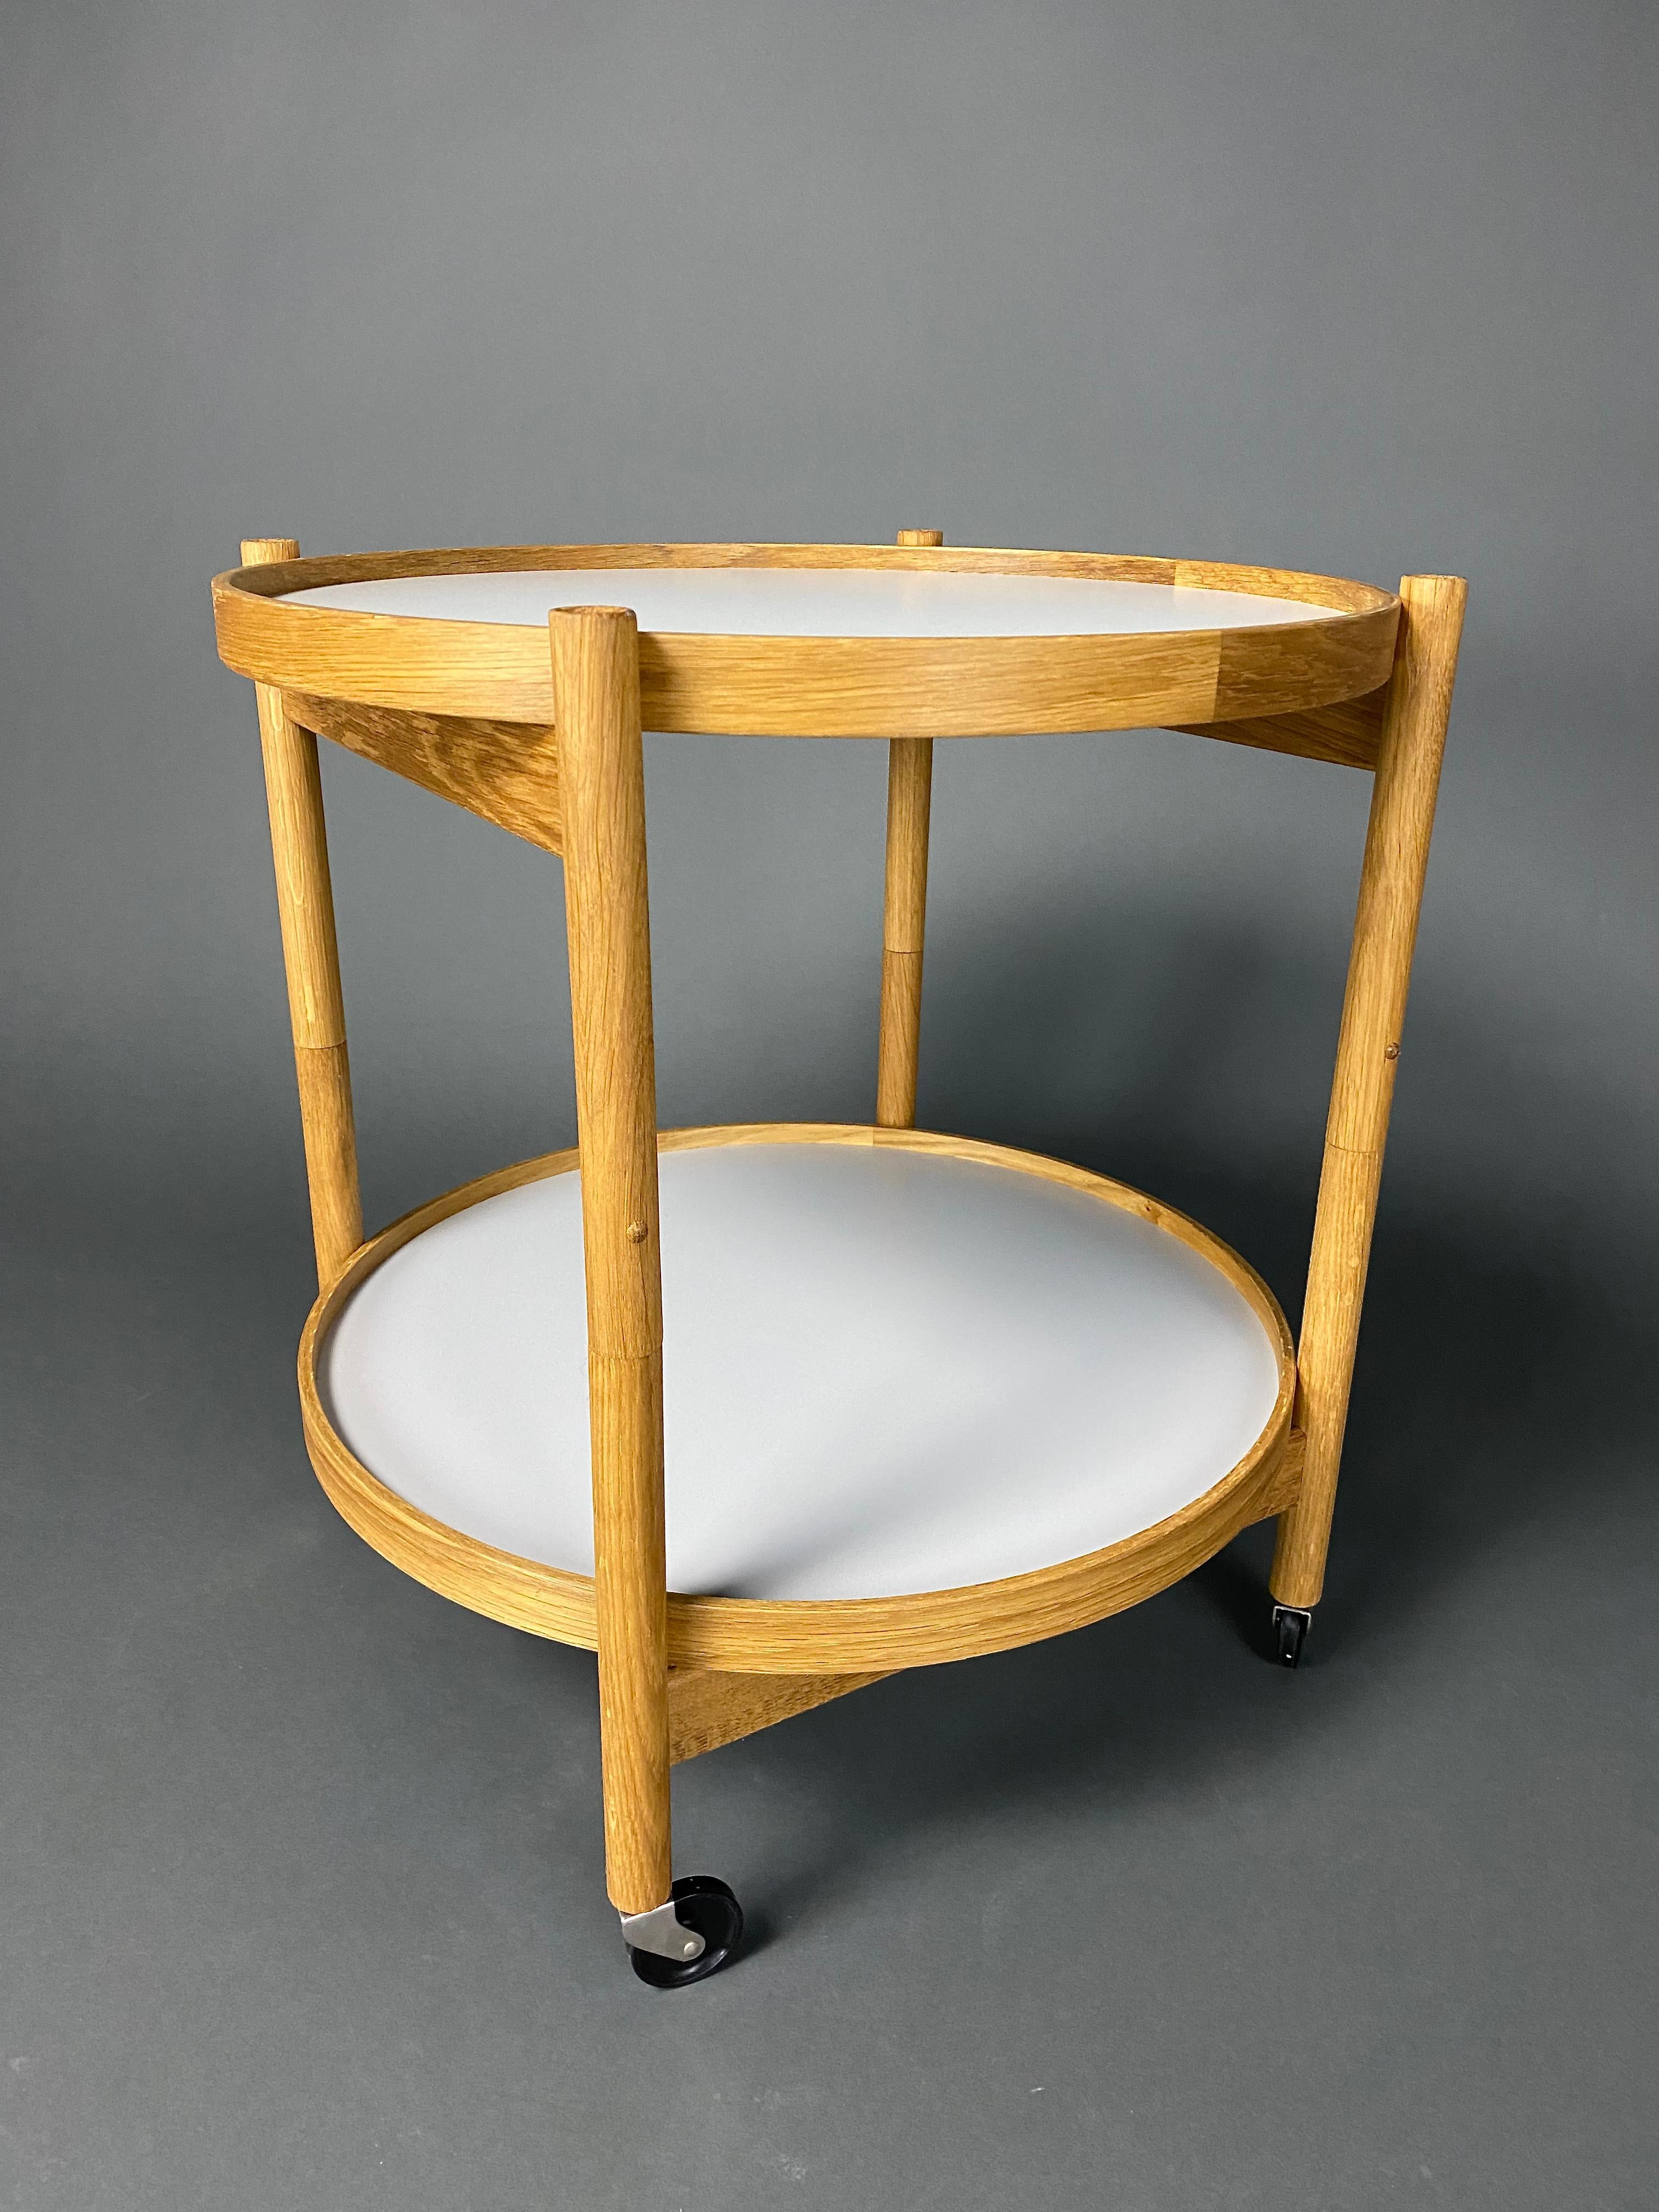 Danish Mid-Century Modern Foldable Serving Trolley For Sale 4